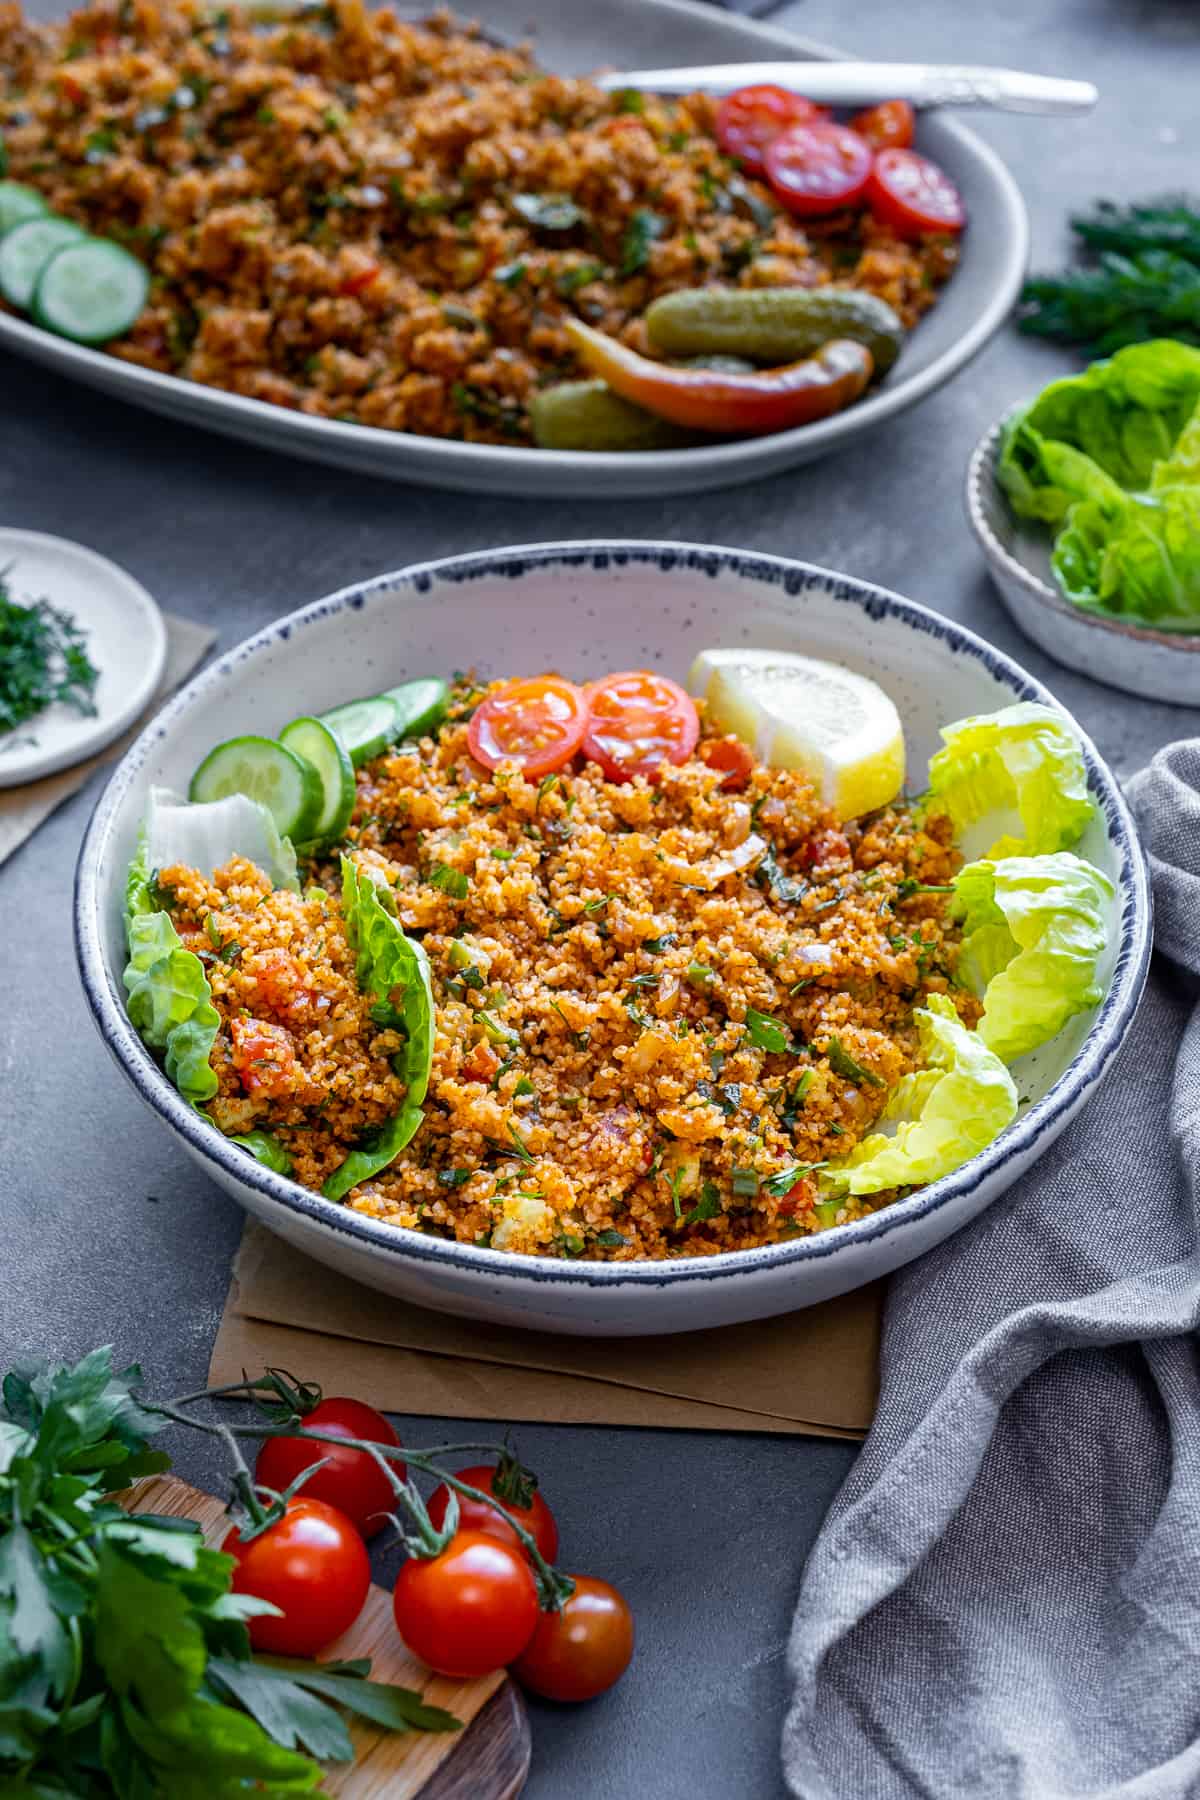 Bulgur salad in a bowl, lettuce leaves on it and another plate loaded with bulgur salad behind it.